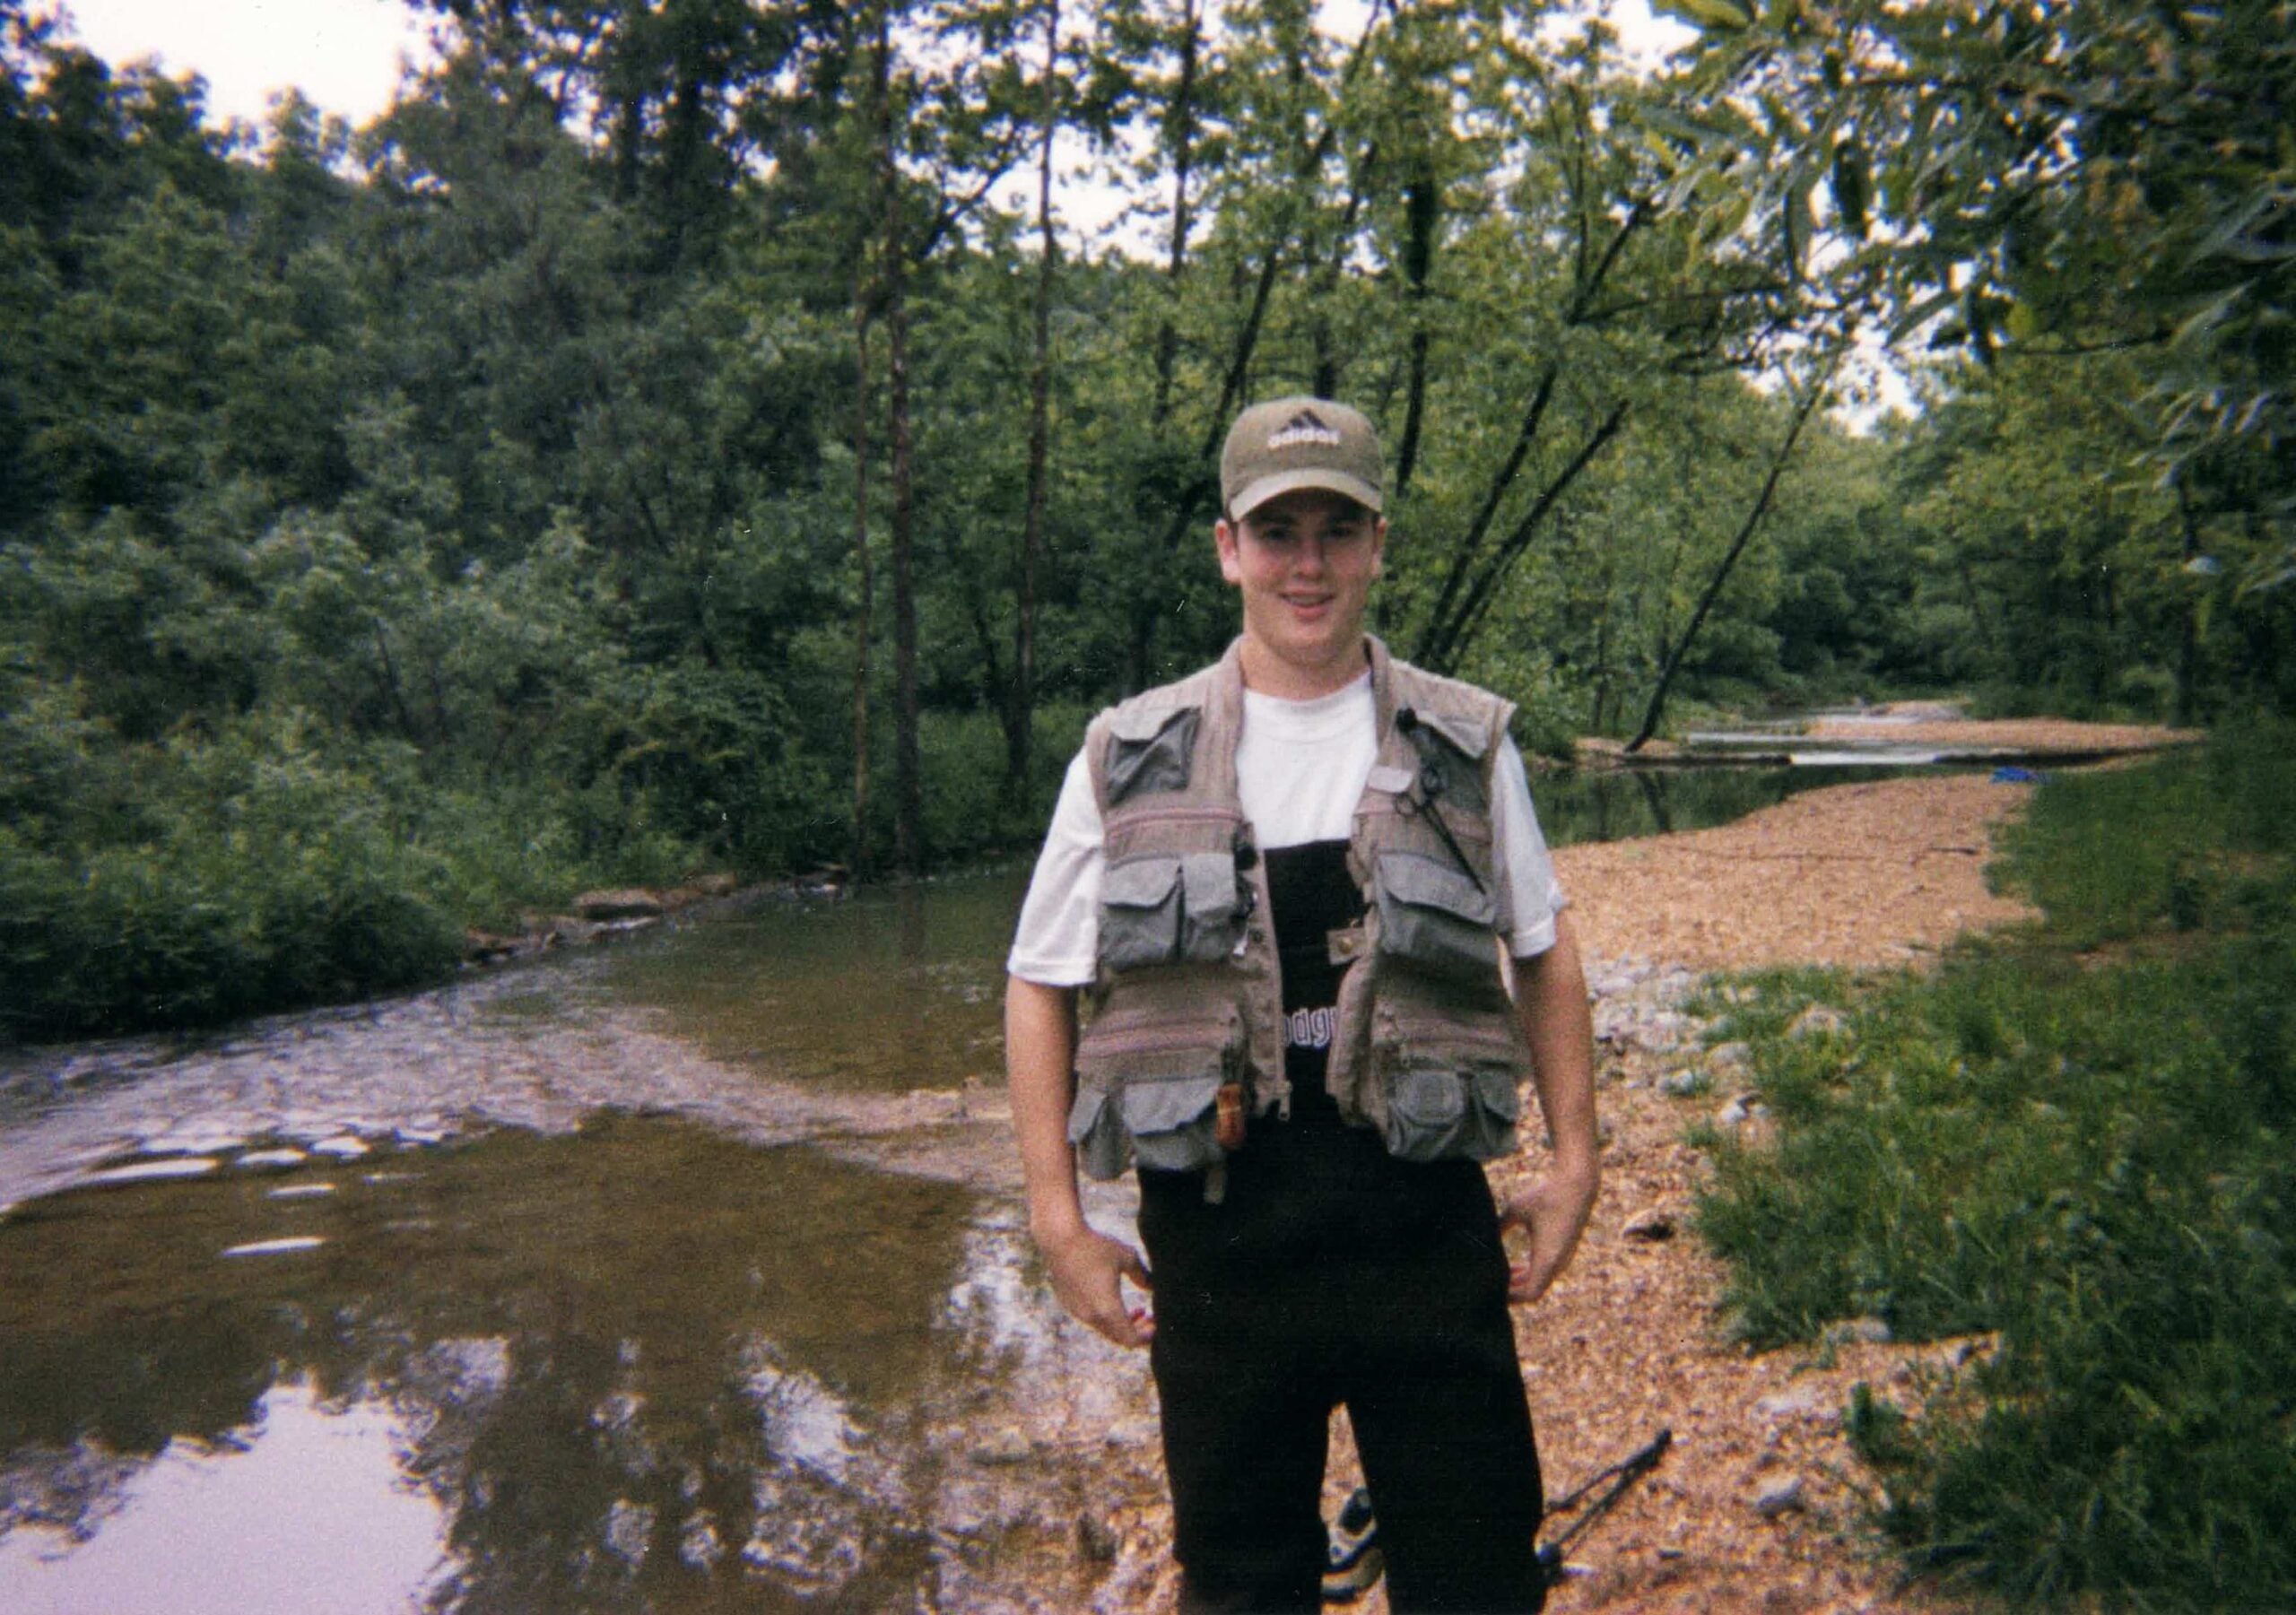 A young fisherman dressed in waders and a fishing vest stands on the bank of a river.